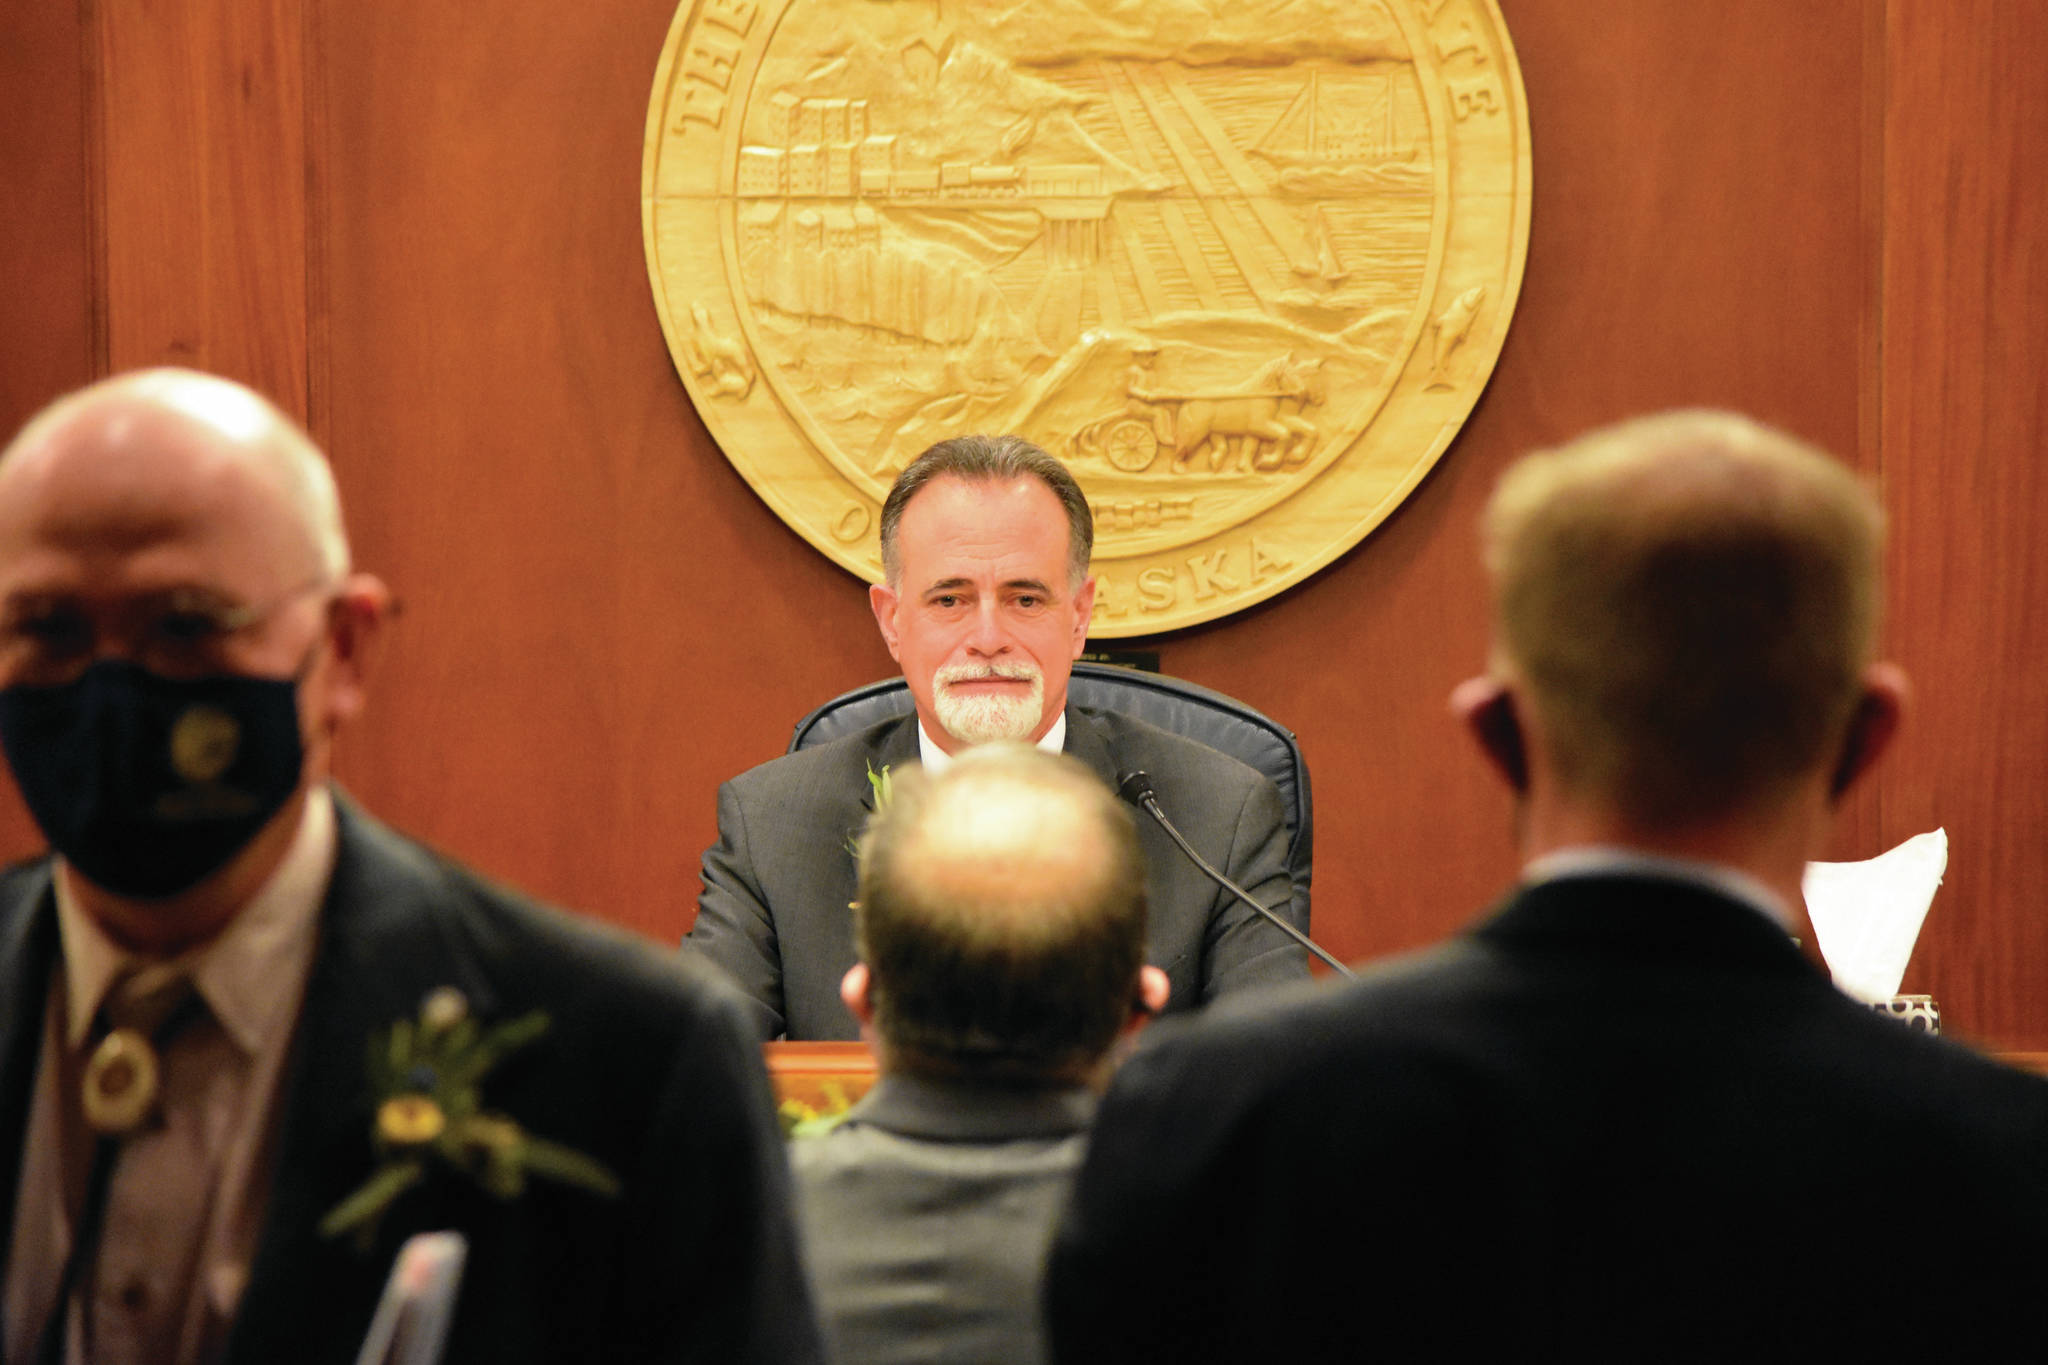 Senate President Peter Micciche, R-Soldotna, has his picture taken by a fellow senator after being unanimously elected on the first day of the 32nd Alaska Legislature on Tuesday, in Juneau. (Peter Segall/The Juneau Empire via AP, Pool)